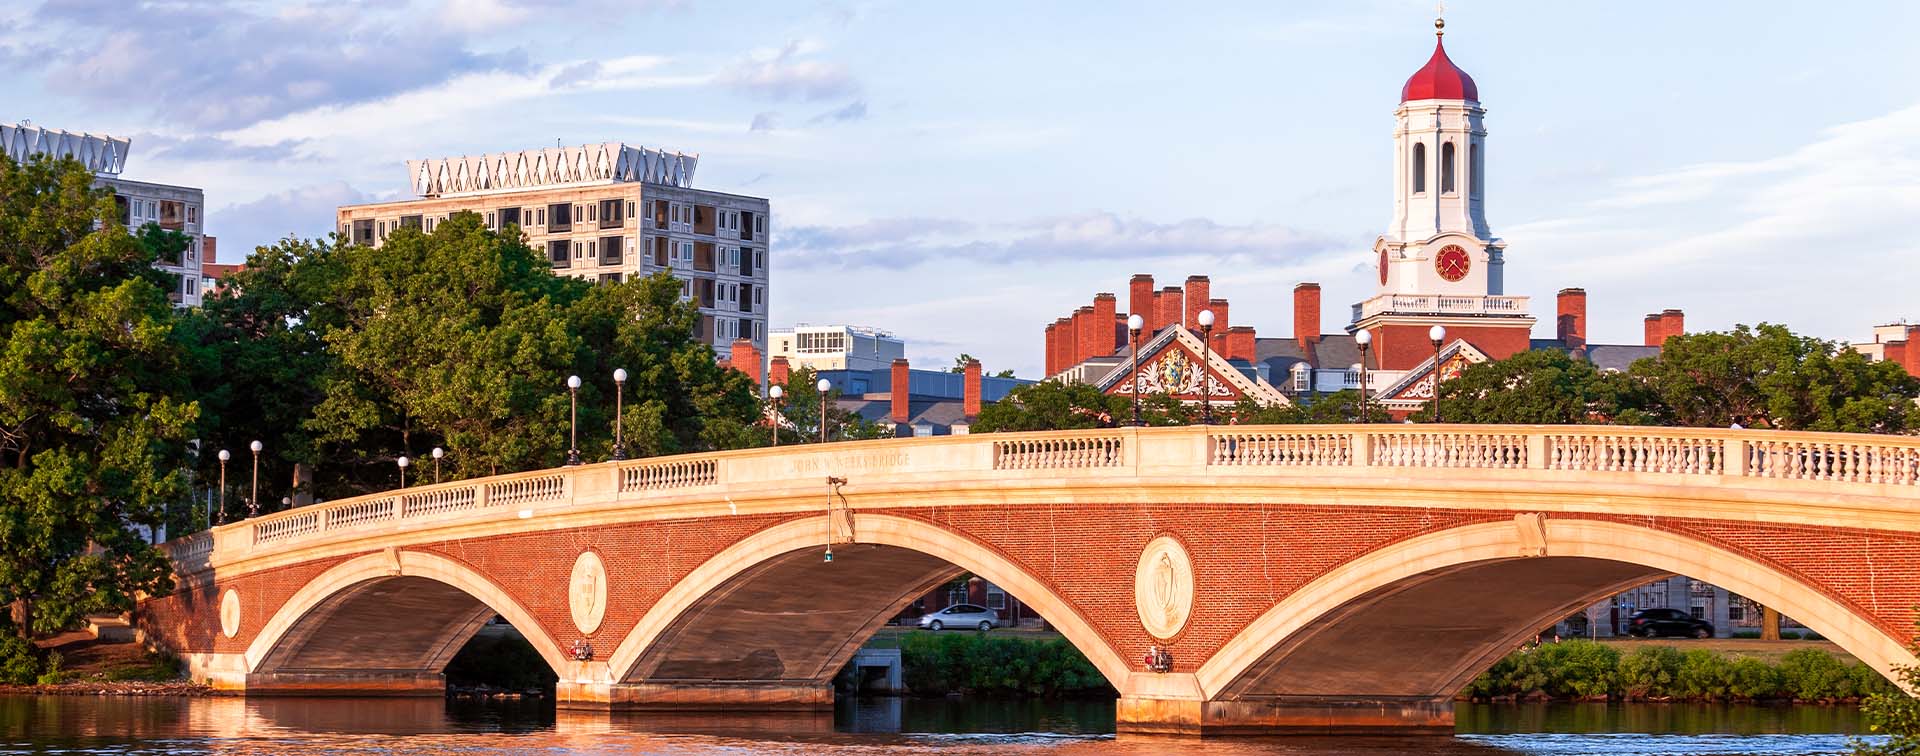 Arch bridge on the Harvard campus over the Charles River with a view of Boston behind it